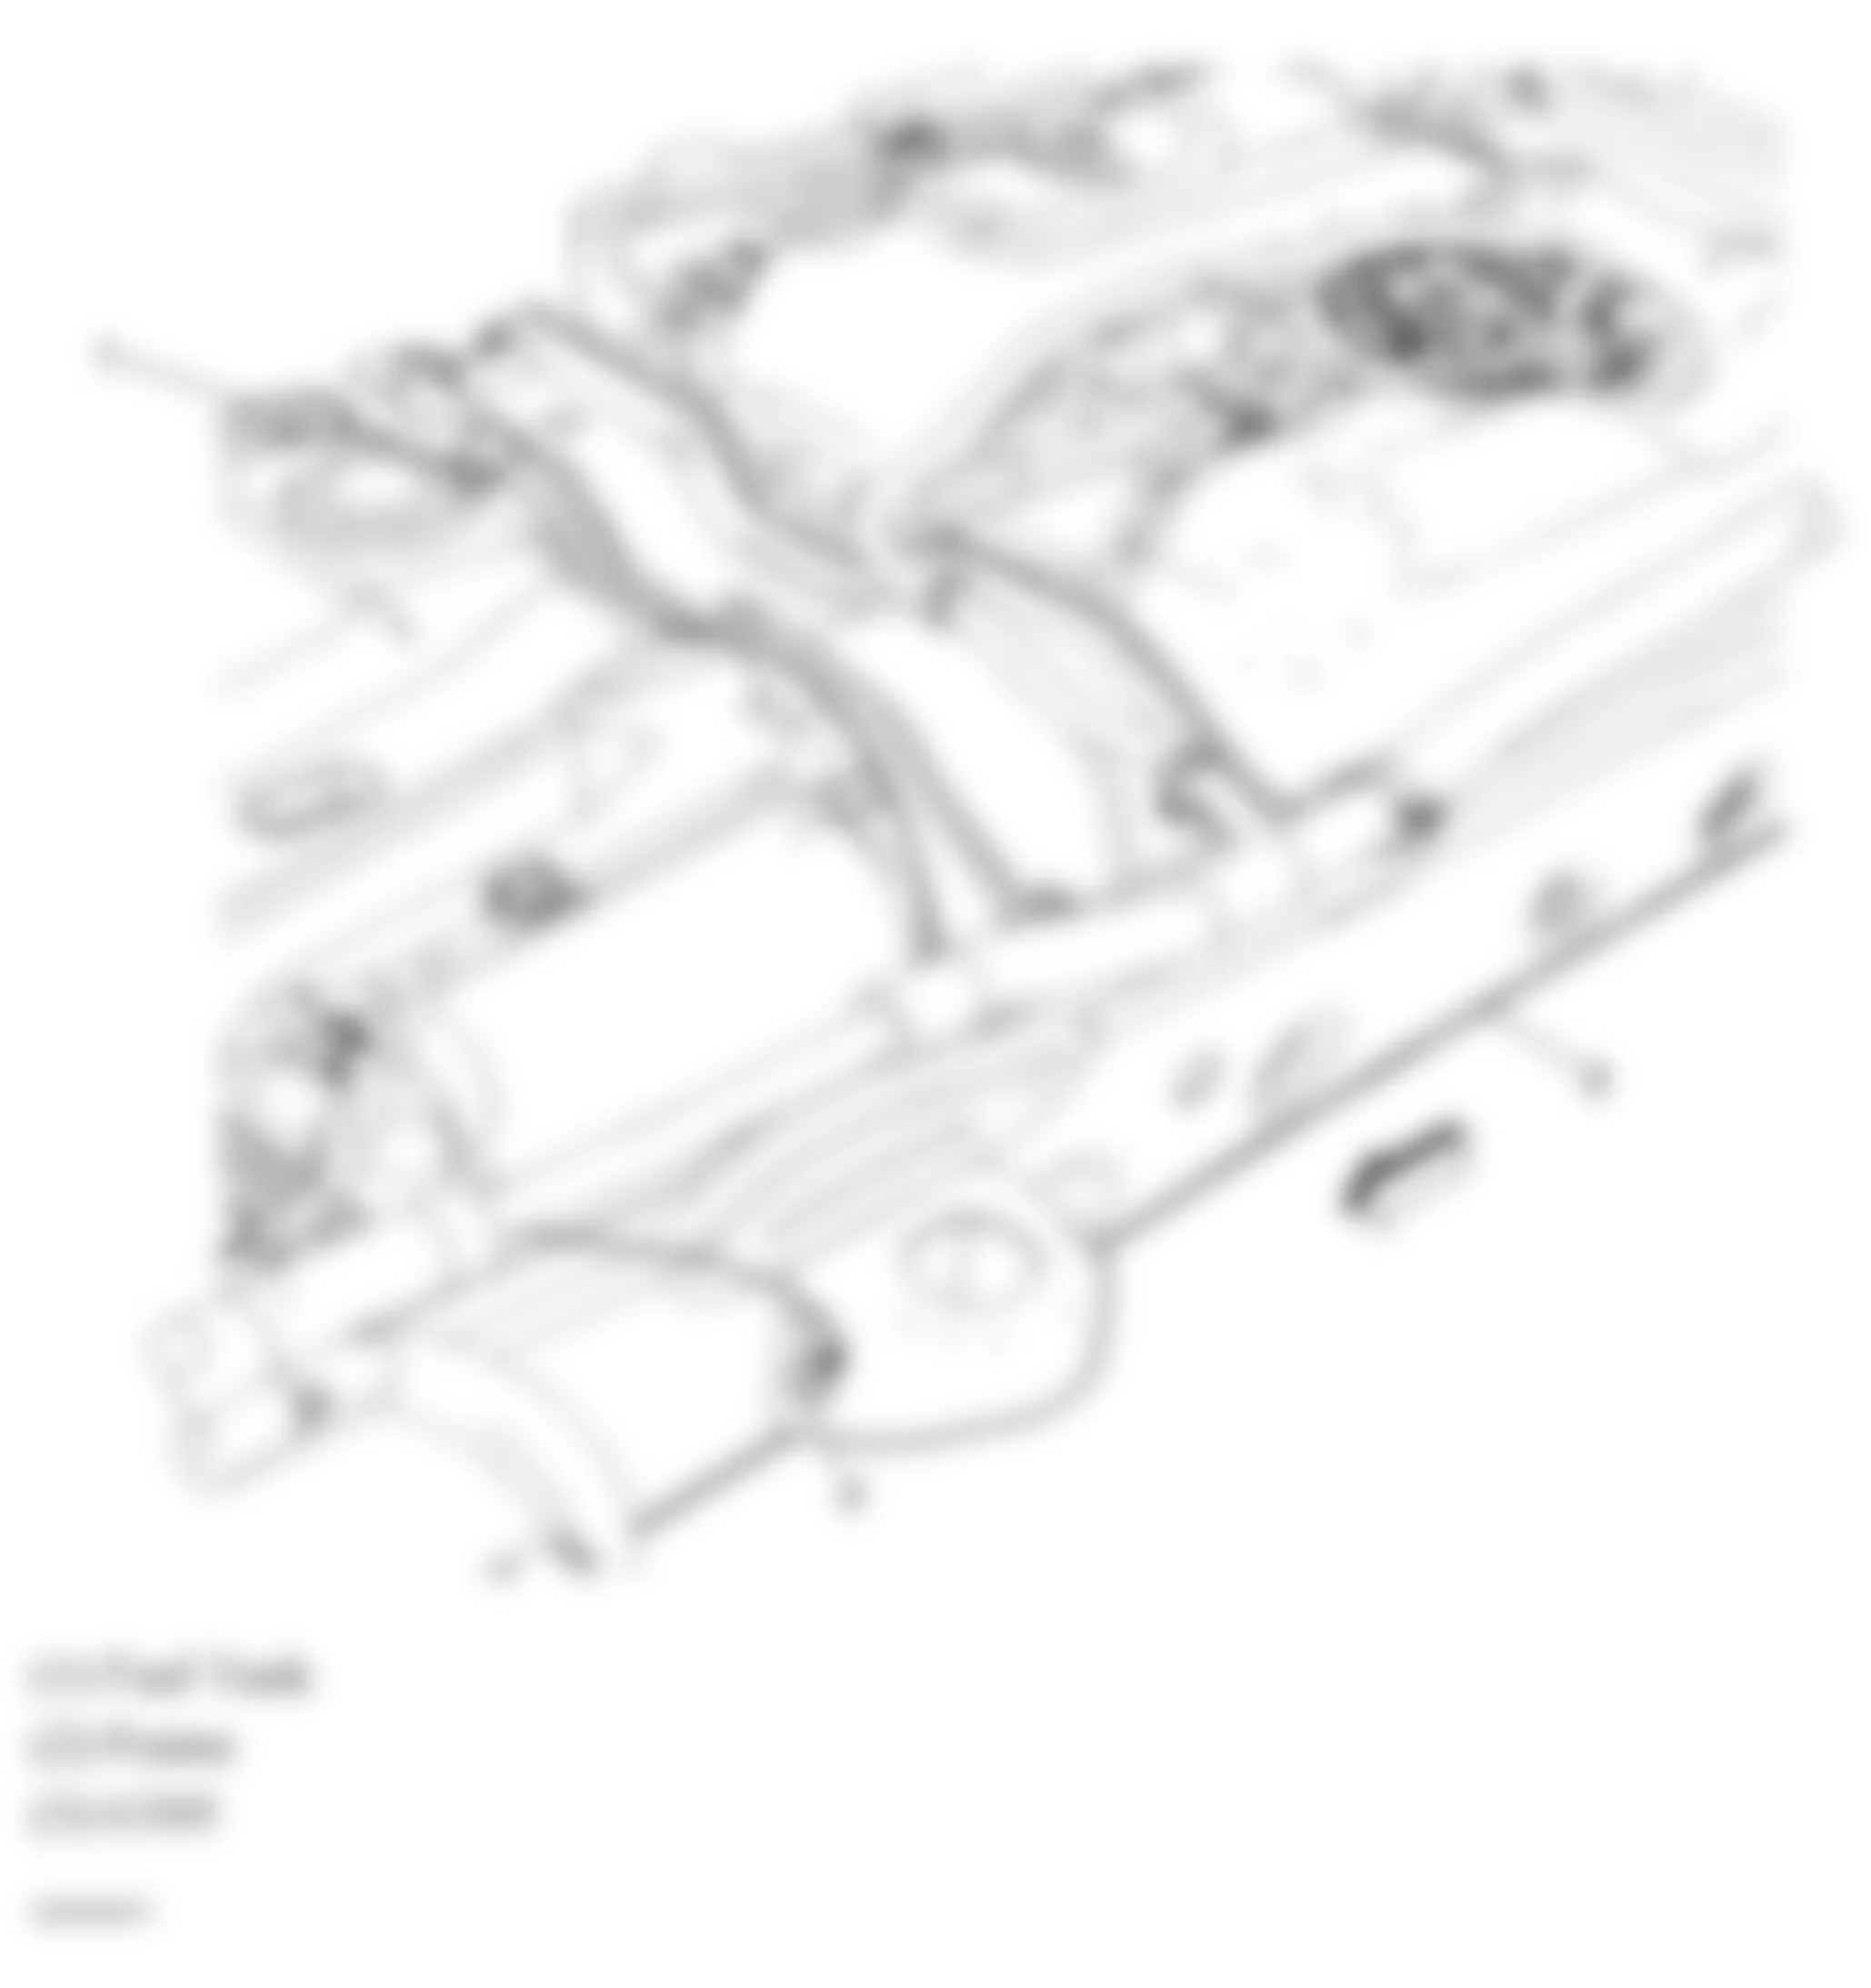 GMC Yukon XL C1500 2009 - Component Locations -  Rear Chassis